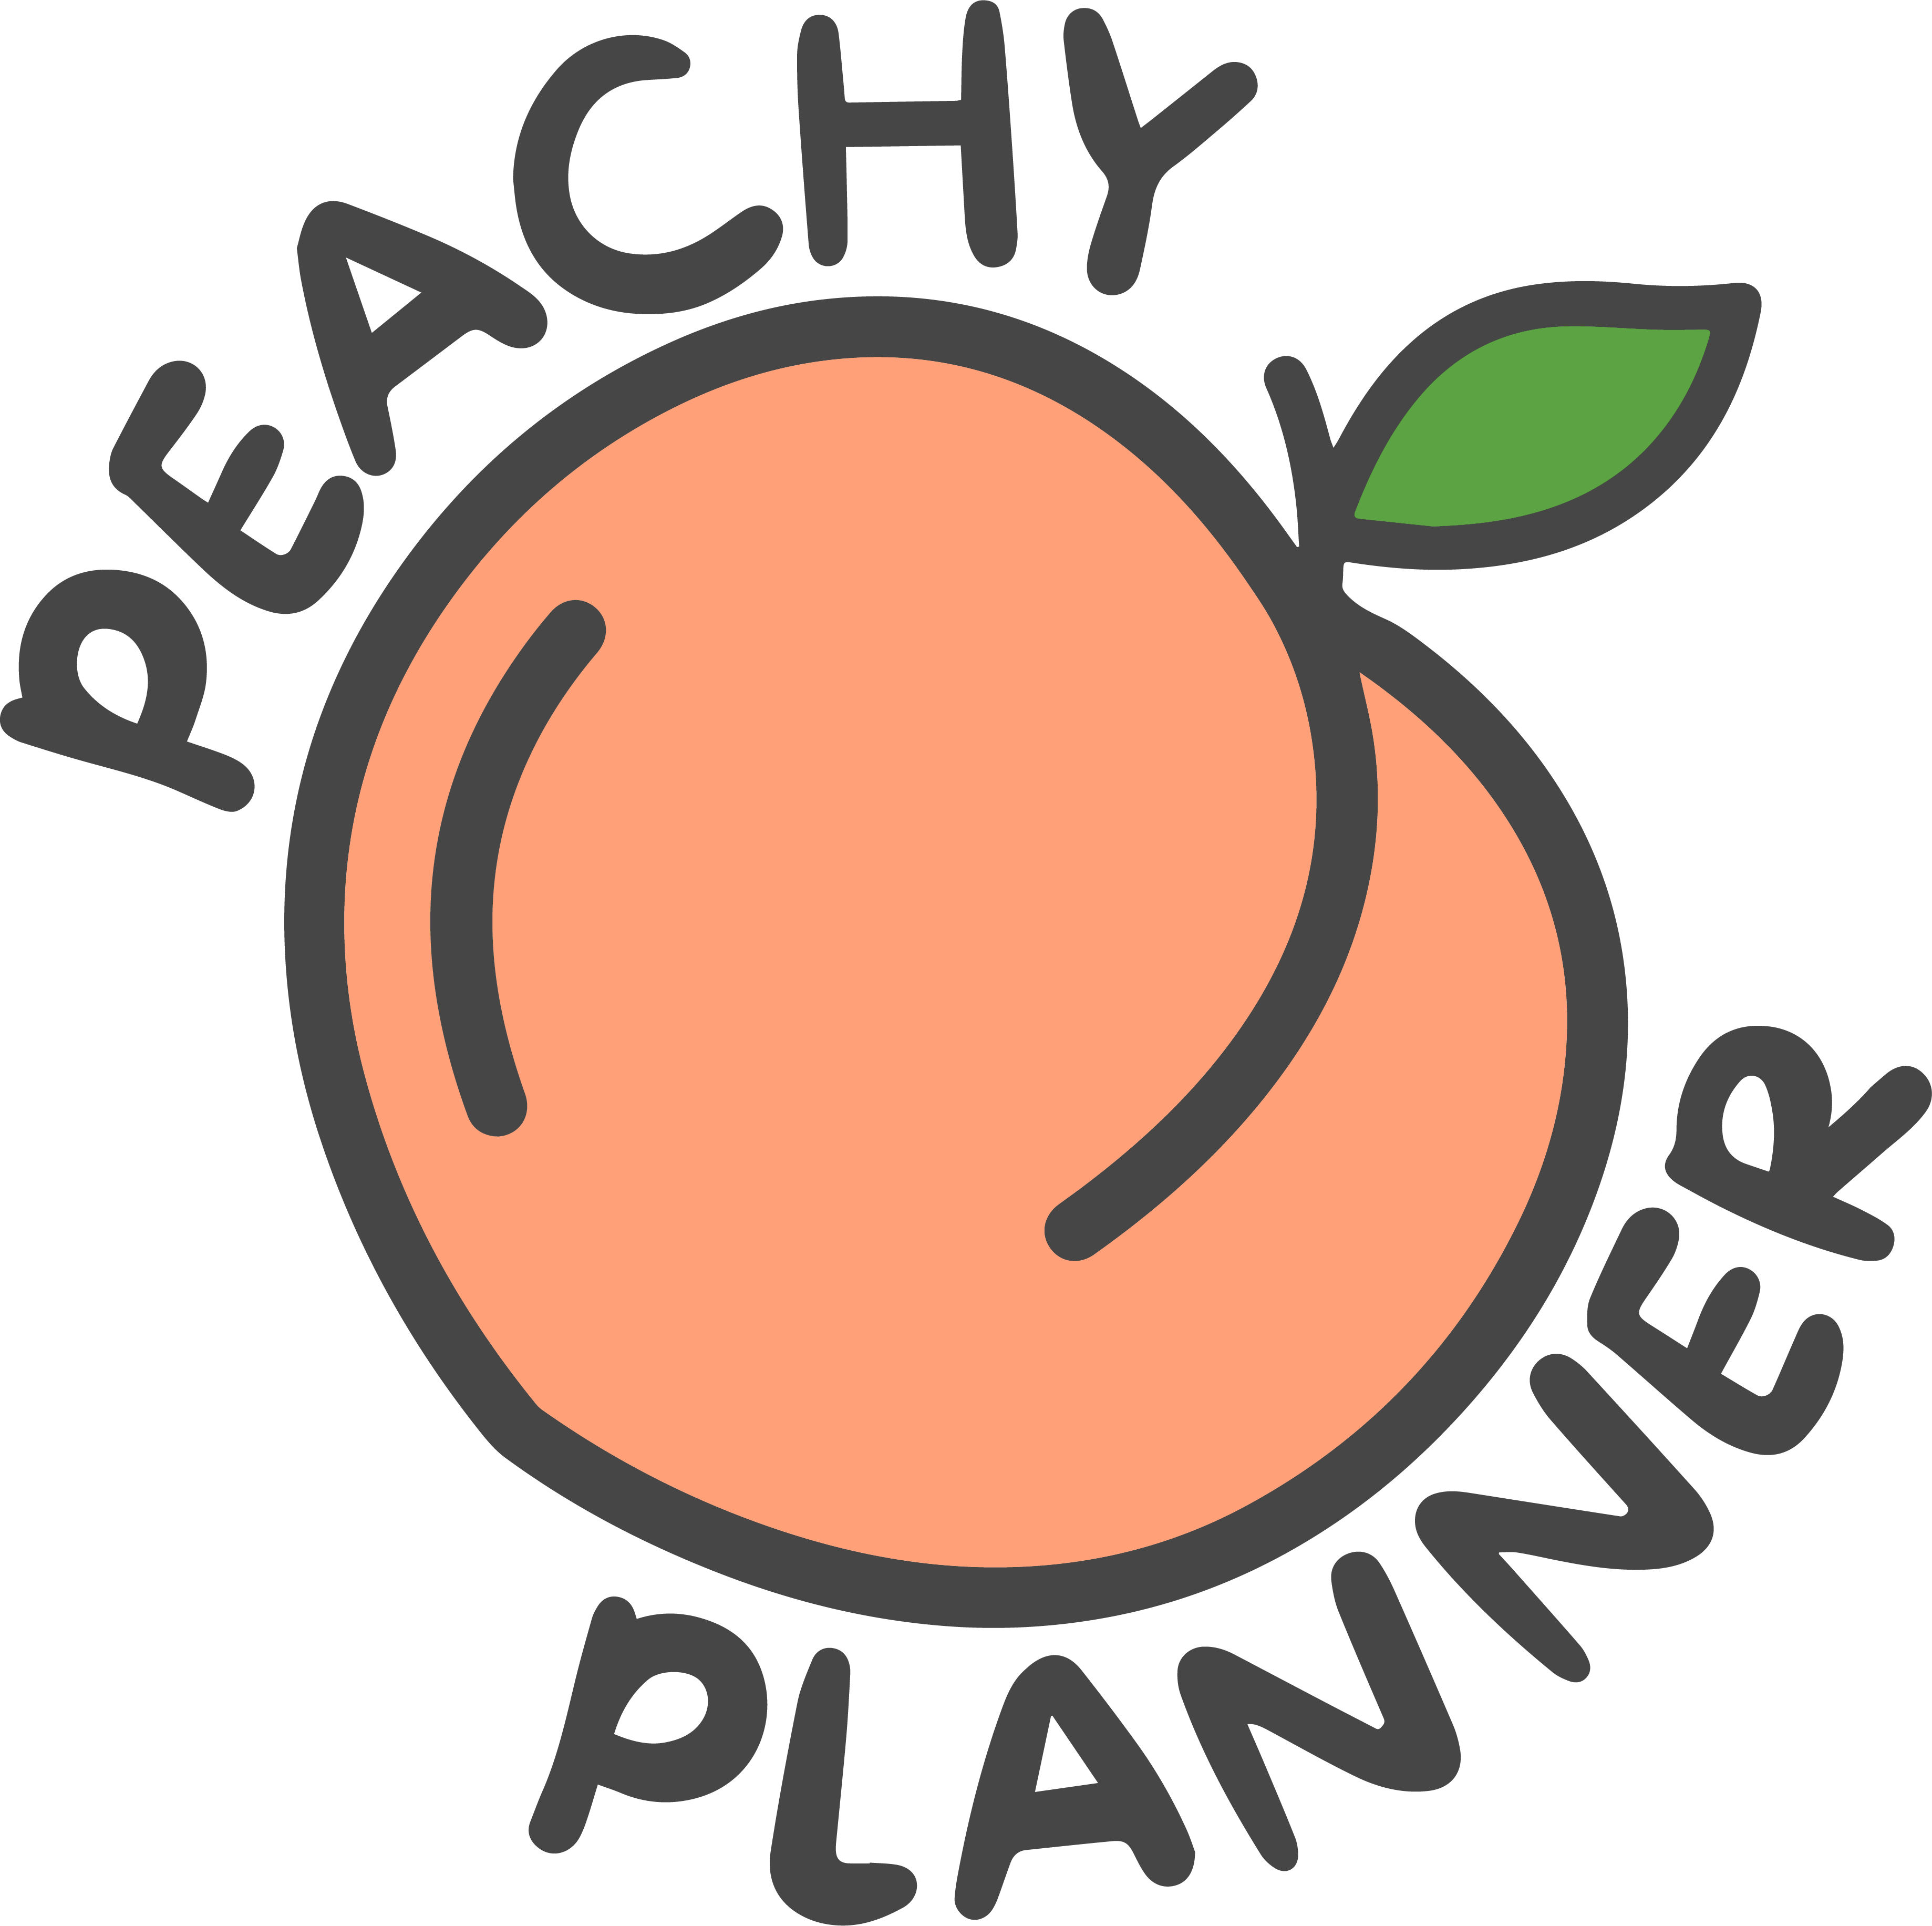 Profile picture of Peachy Planner